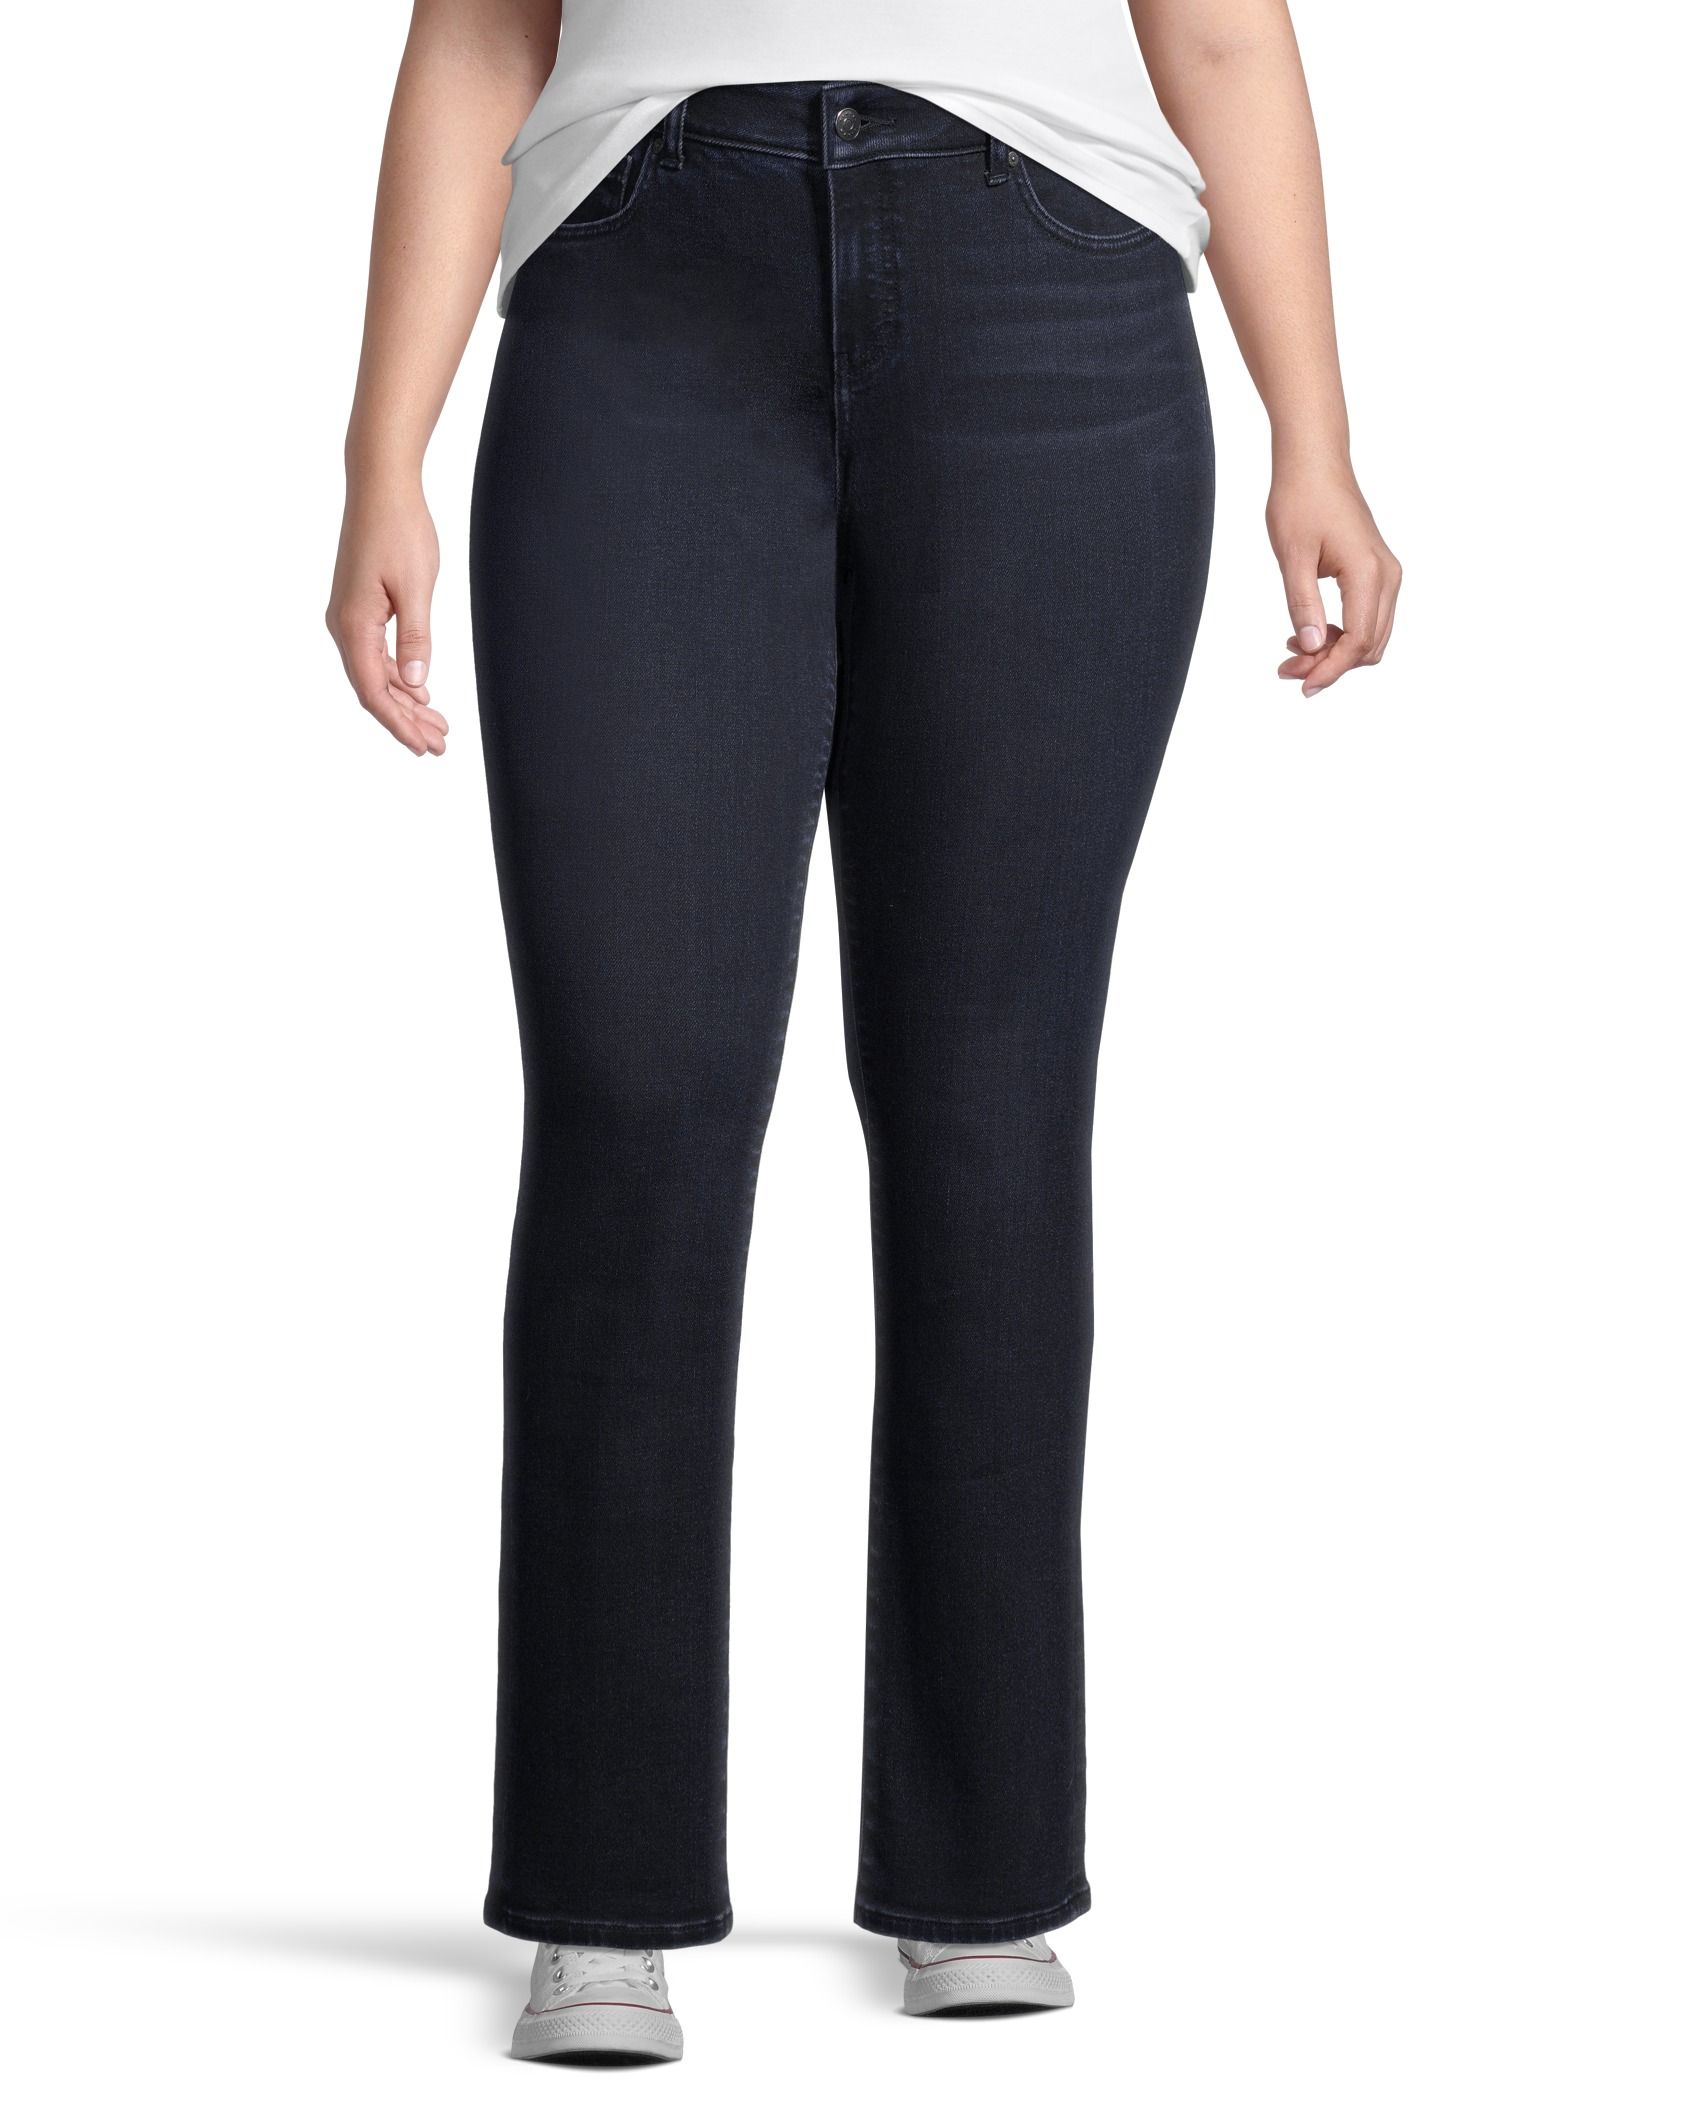 Aam Pants Are The Curvy Woman's Solution To Finding Trousers